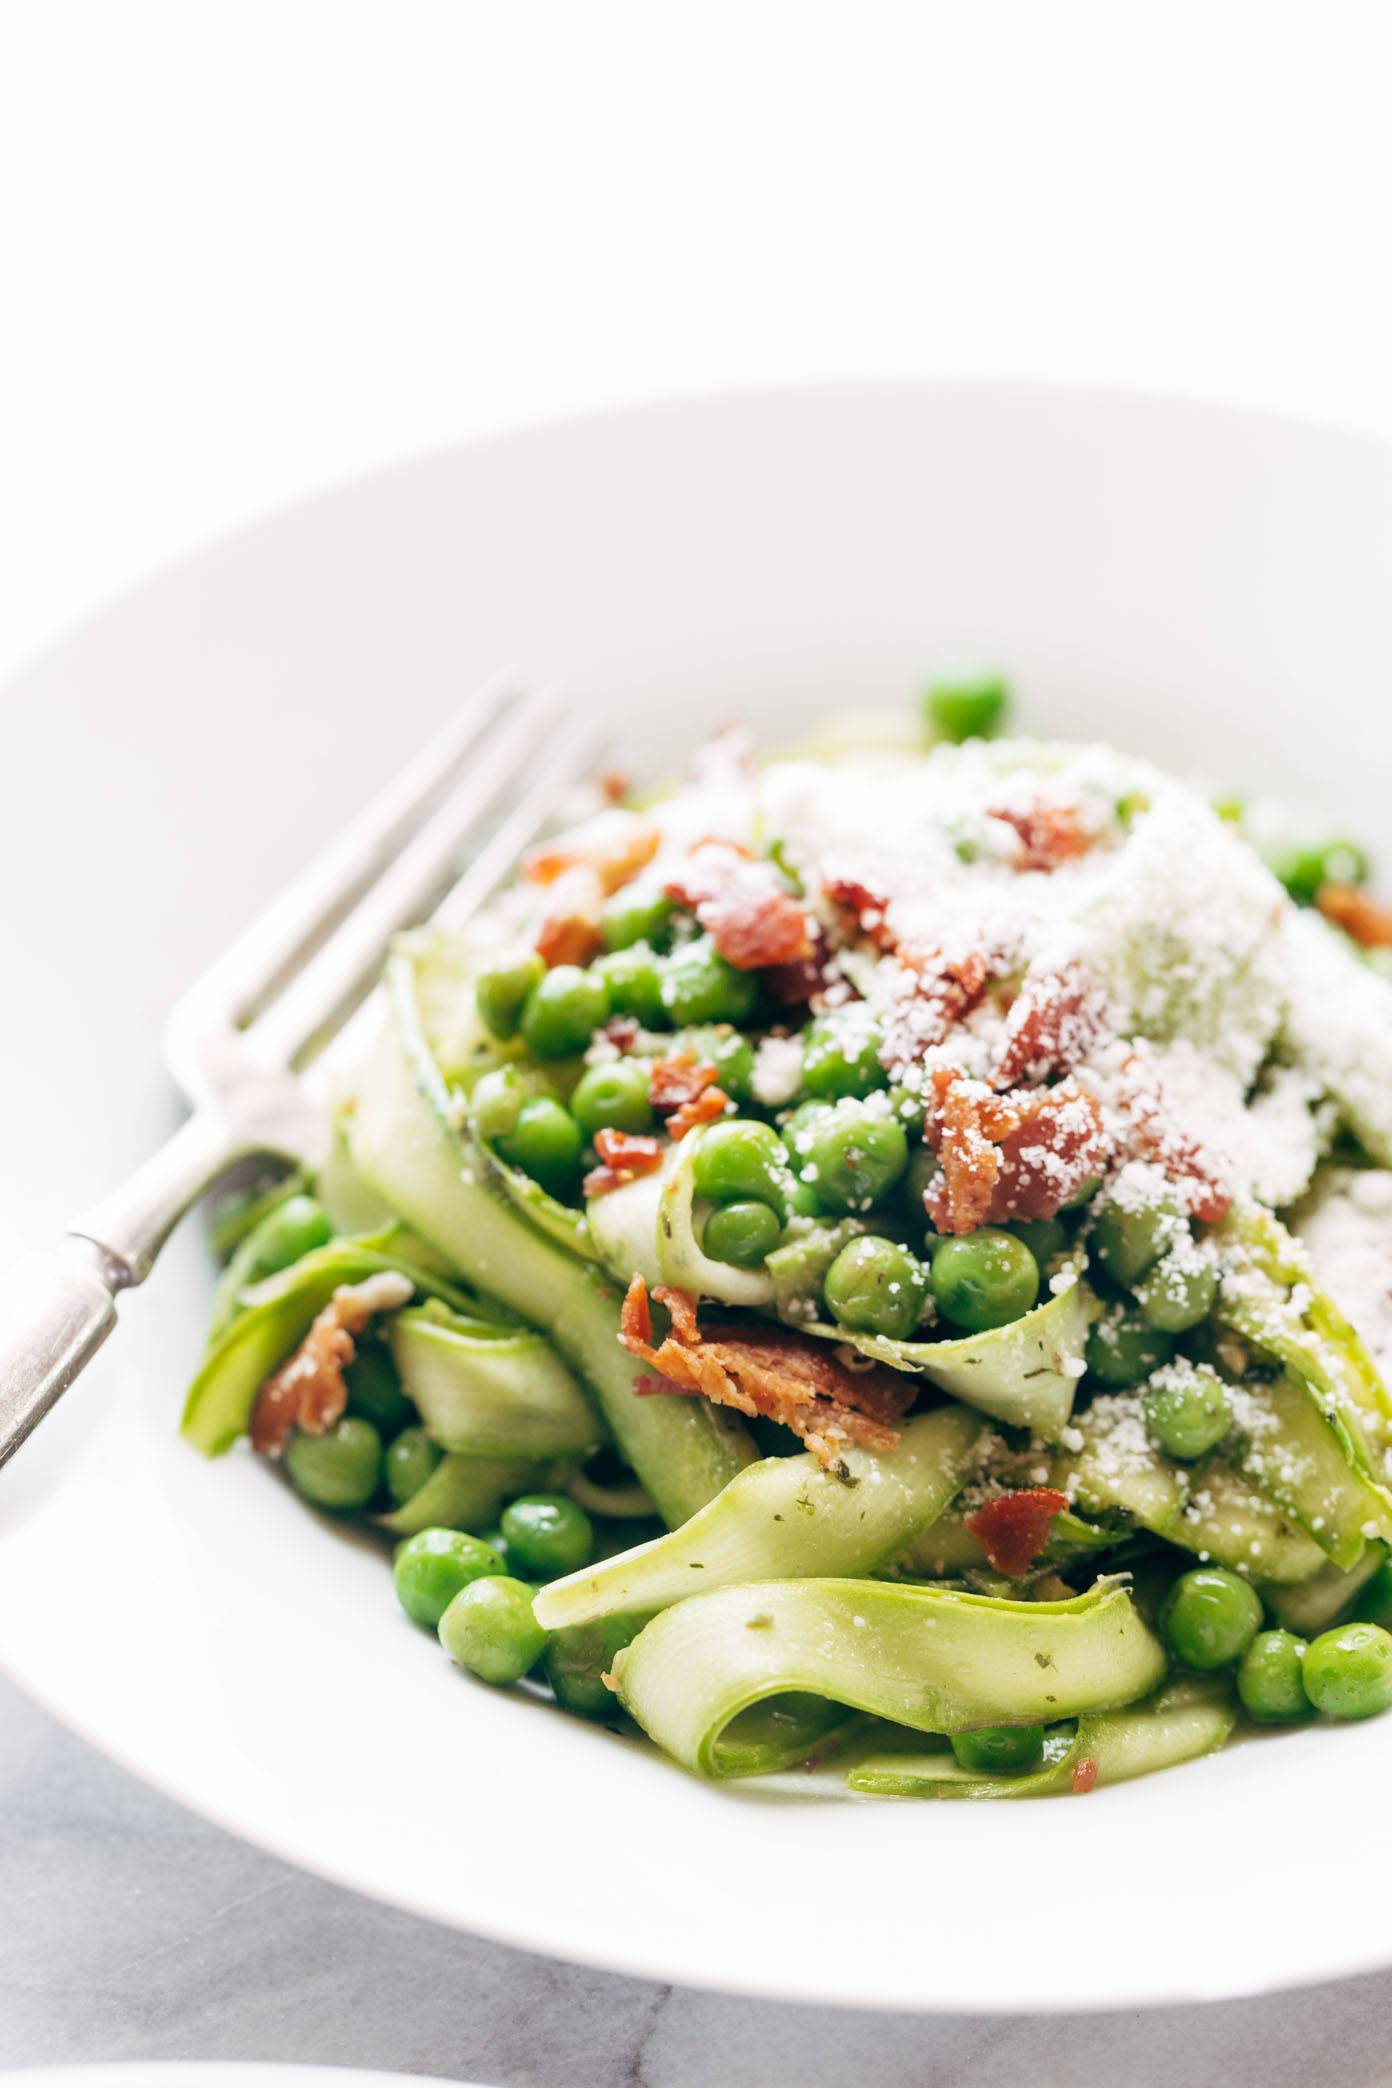 Asparagus Noodles with Pesto in a bowl with a fork.